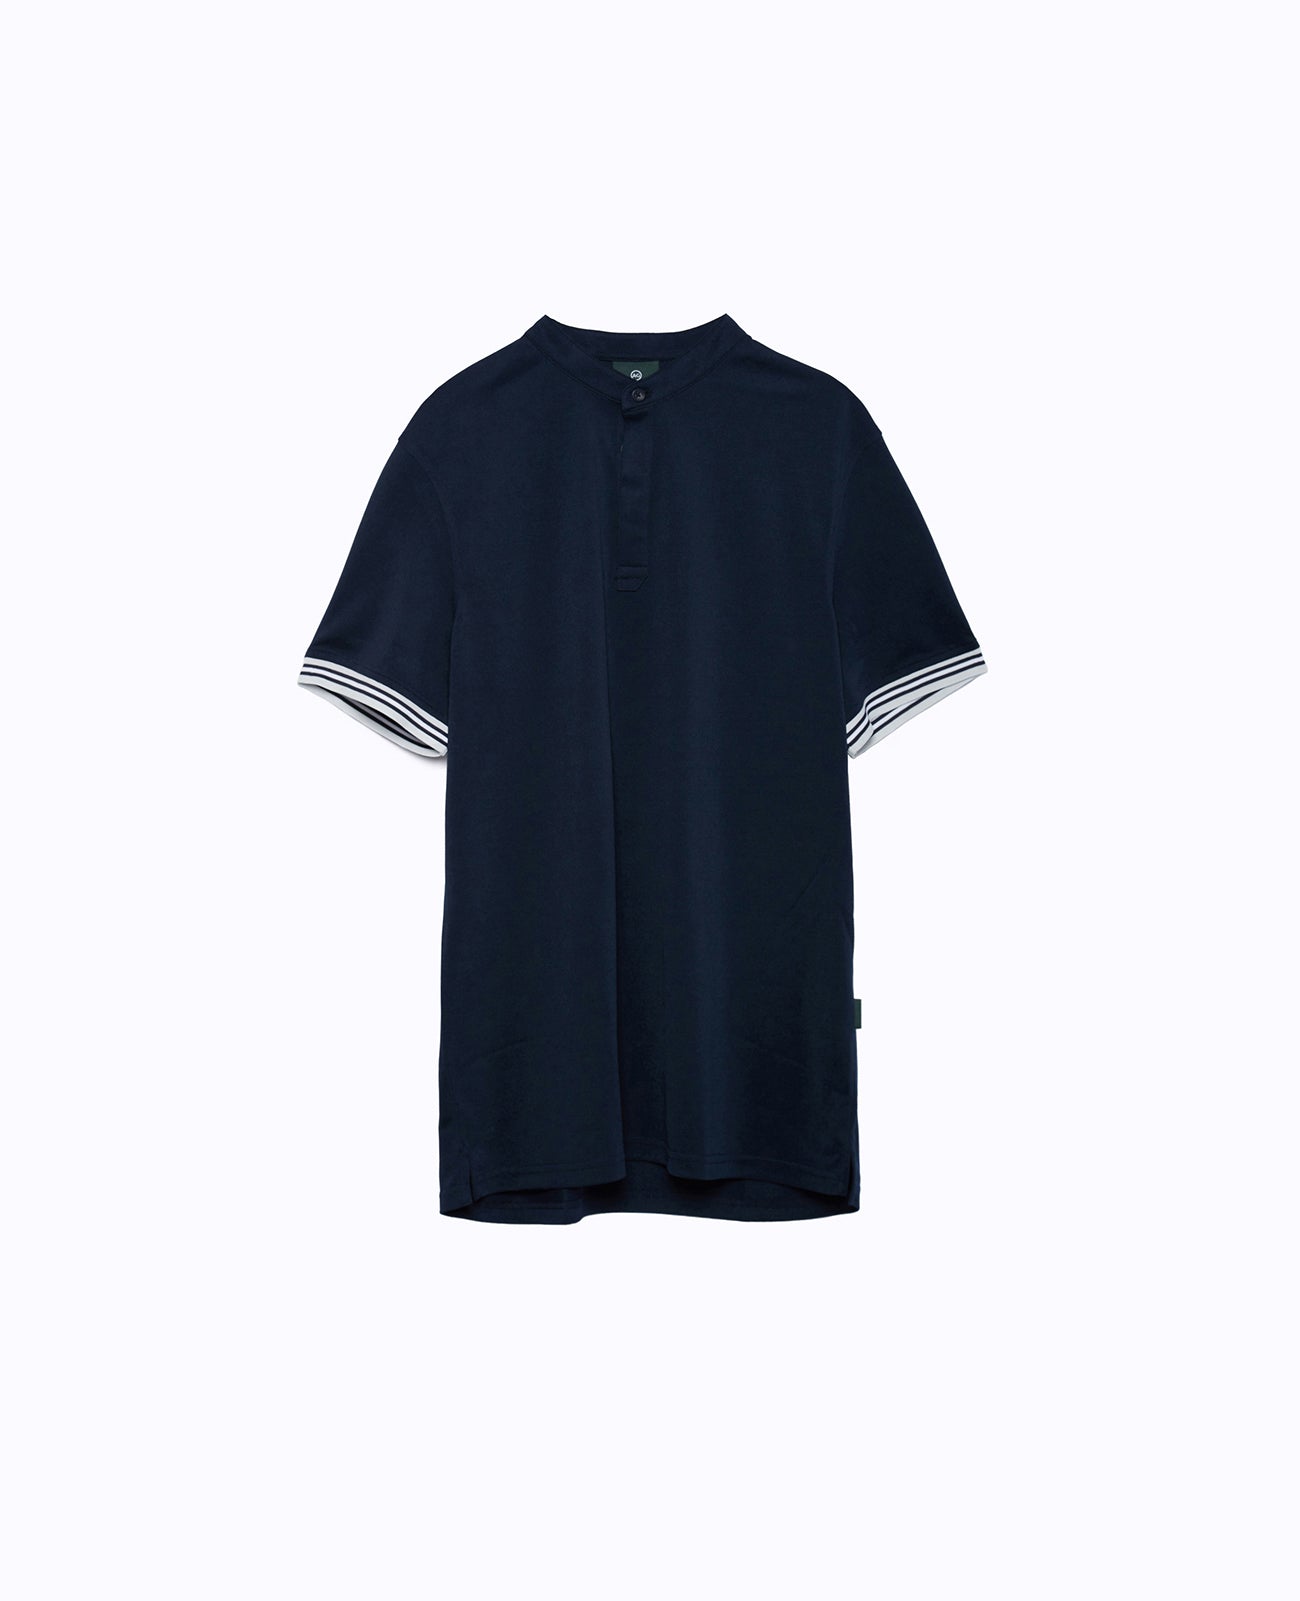 Haskett Polo Naval Blue Green Label Collection Men Tops Photo 6